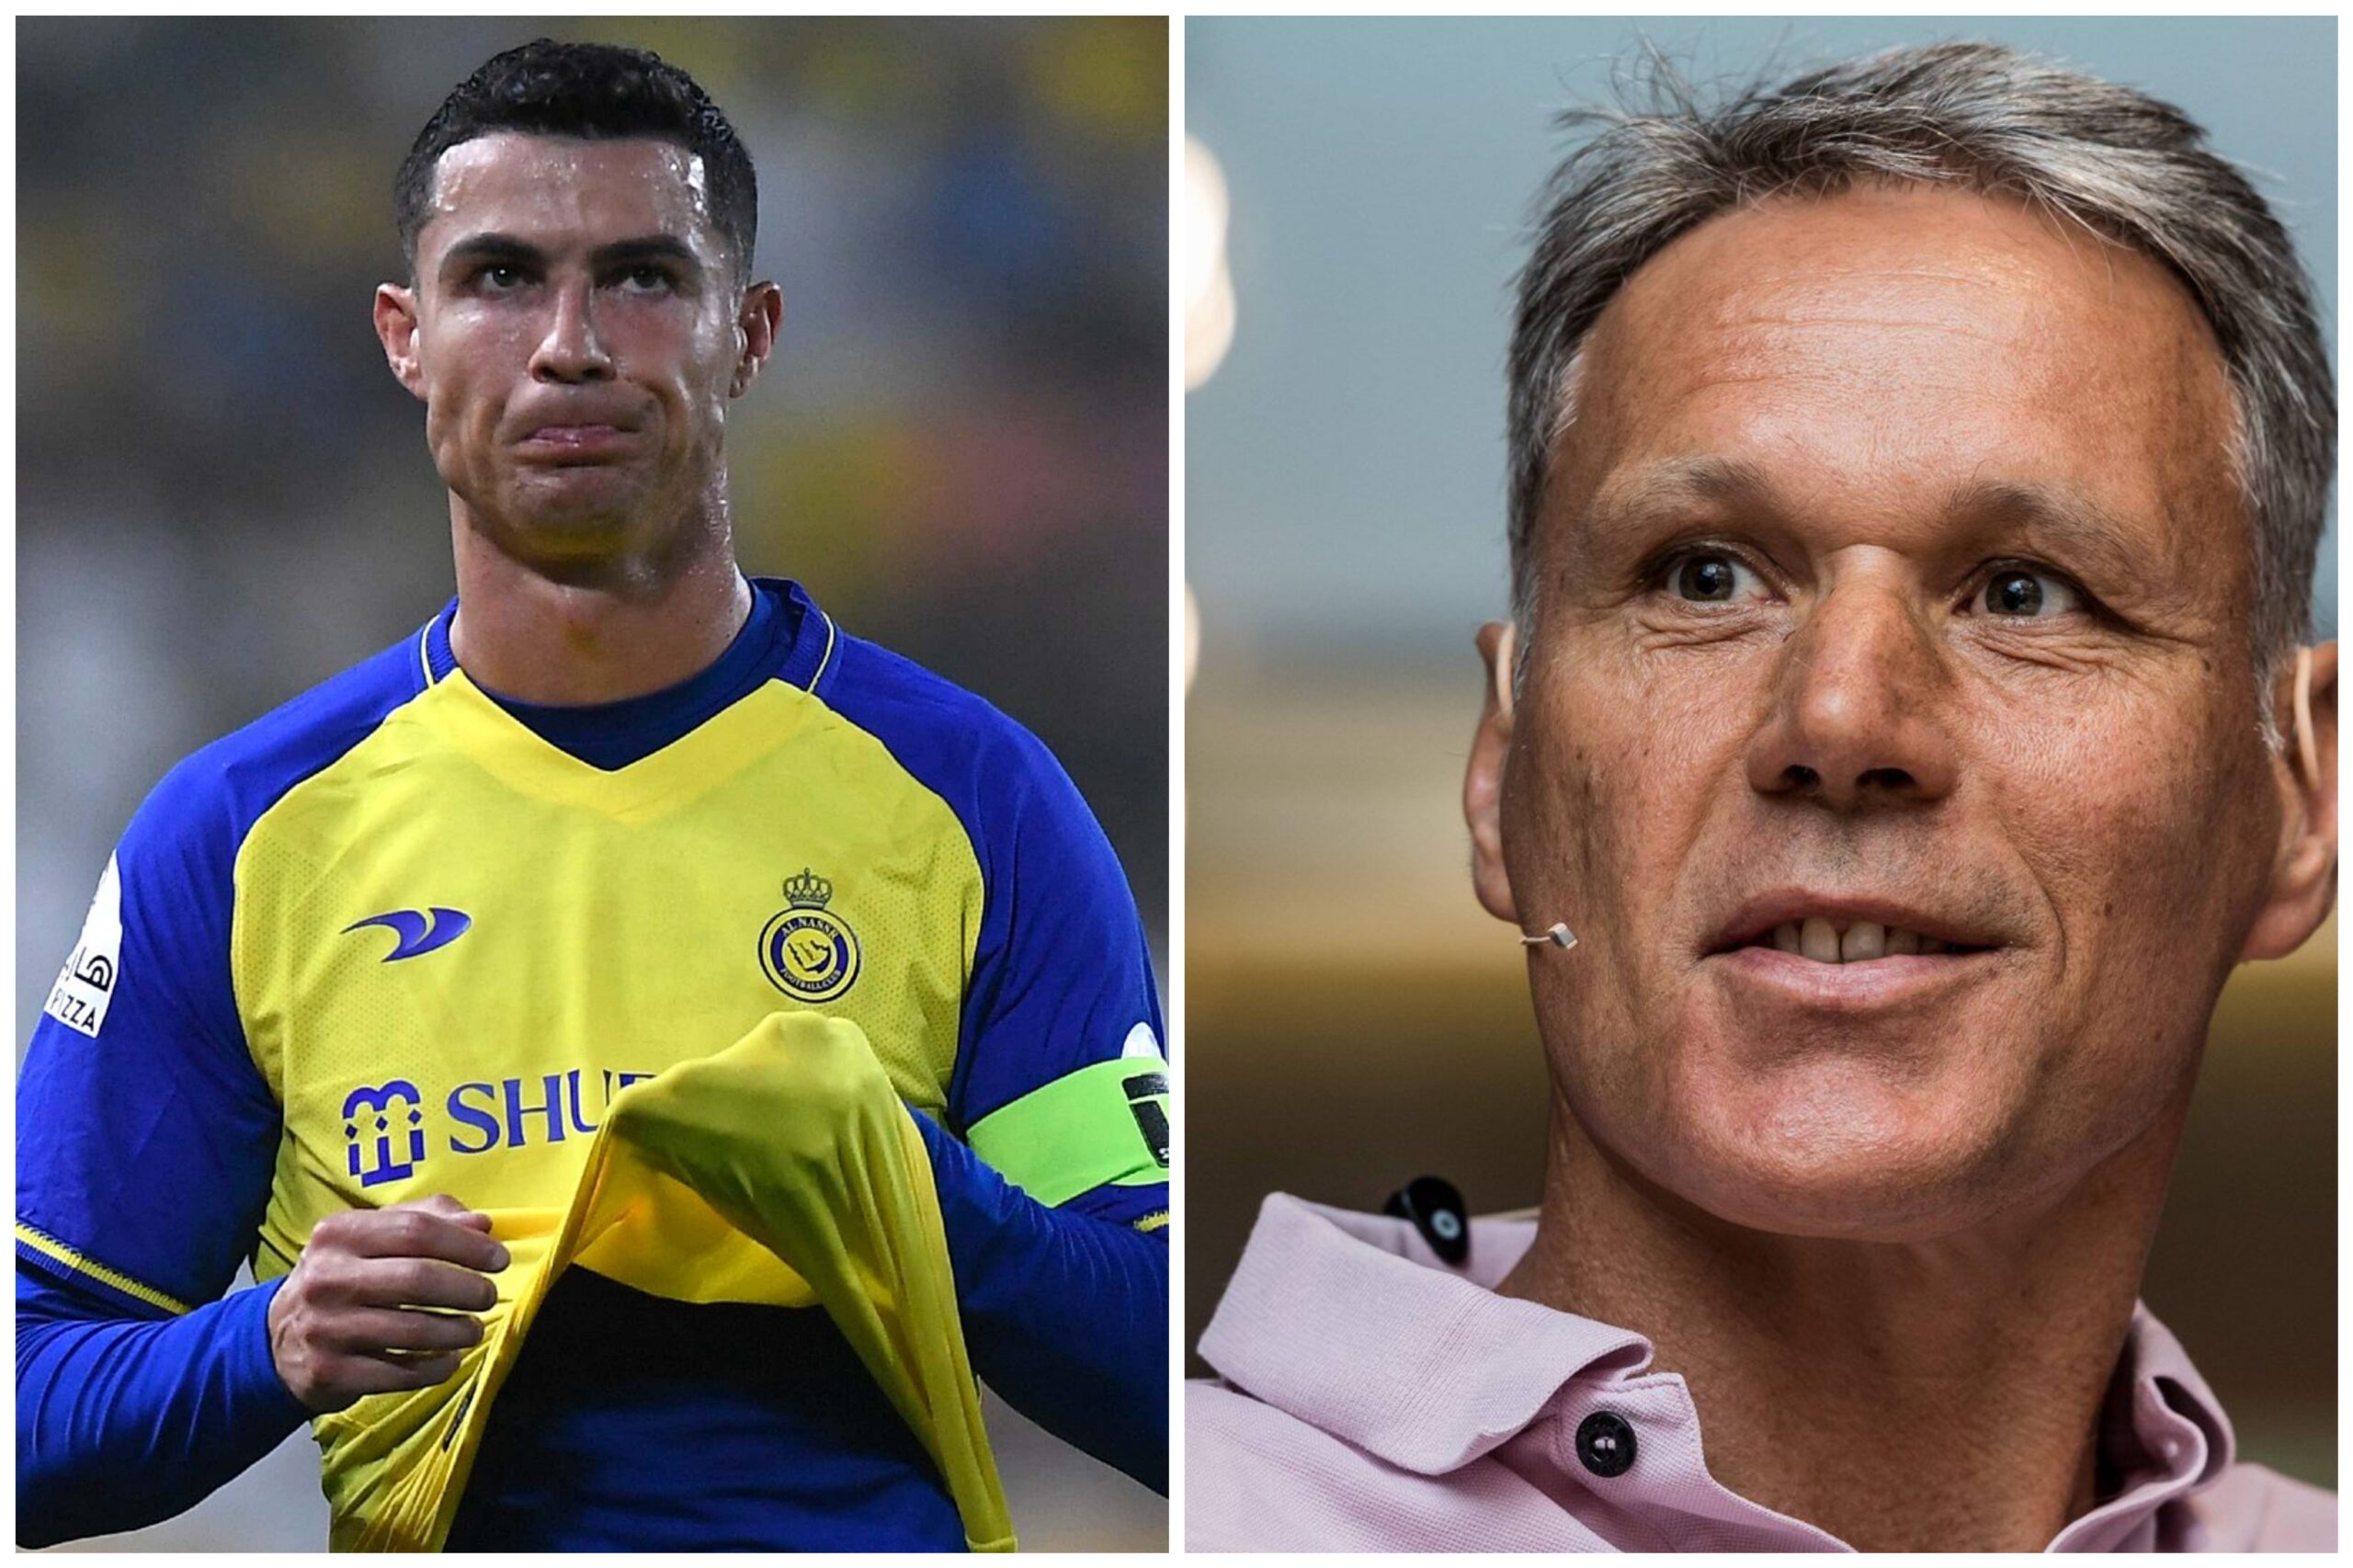 He's Getting Closer To Me - Marco Van Basten Compares Himself To Cristiano Ronaldo